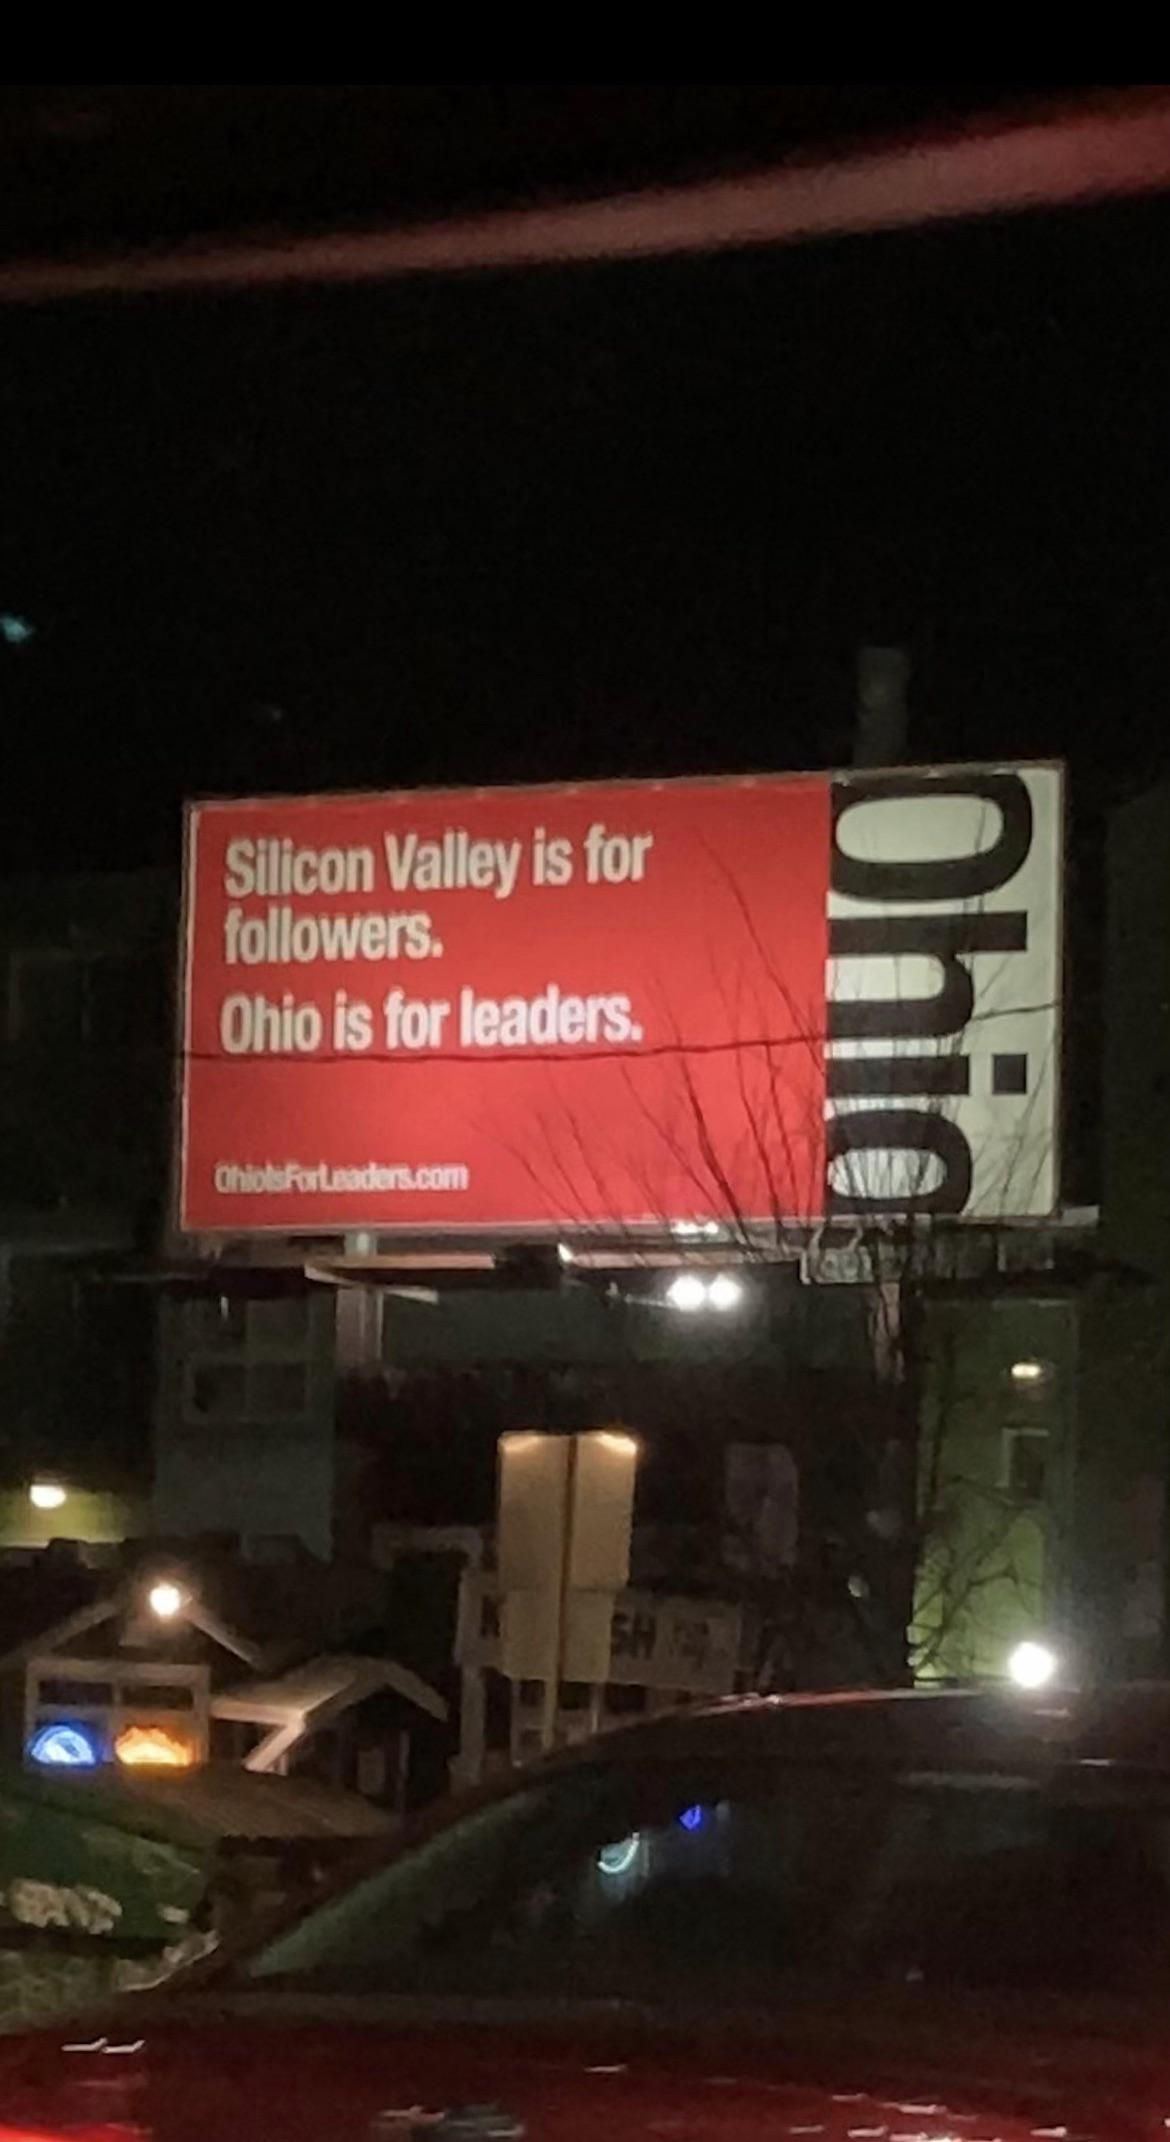 Silicon Valley is for followers. Ohio is for leaders.